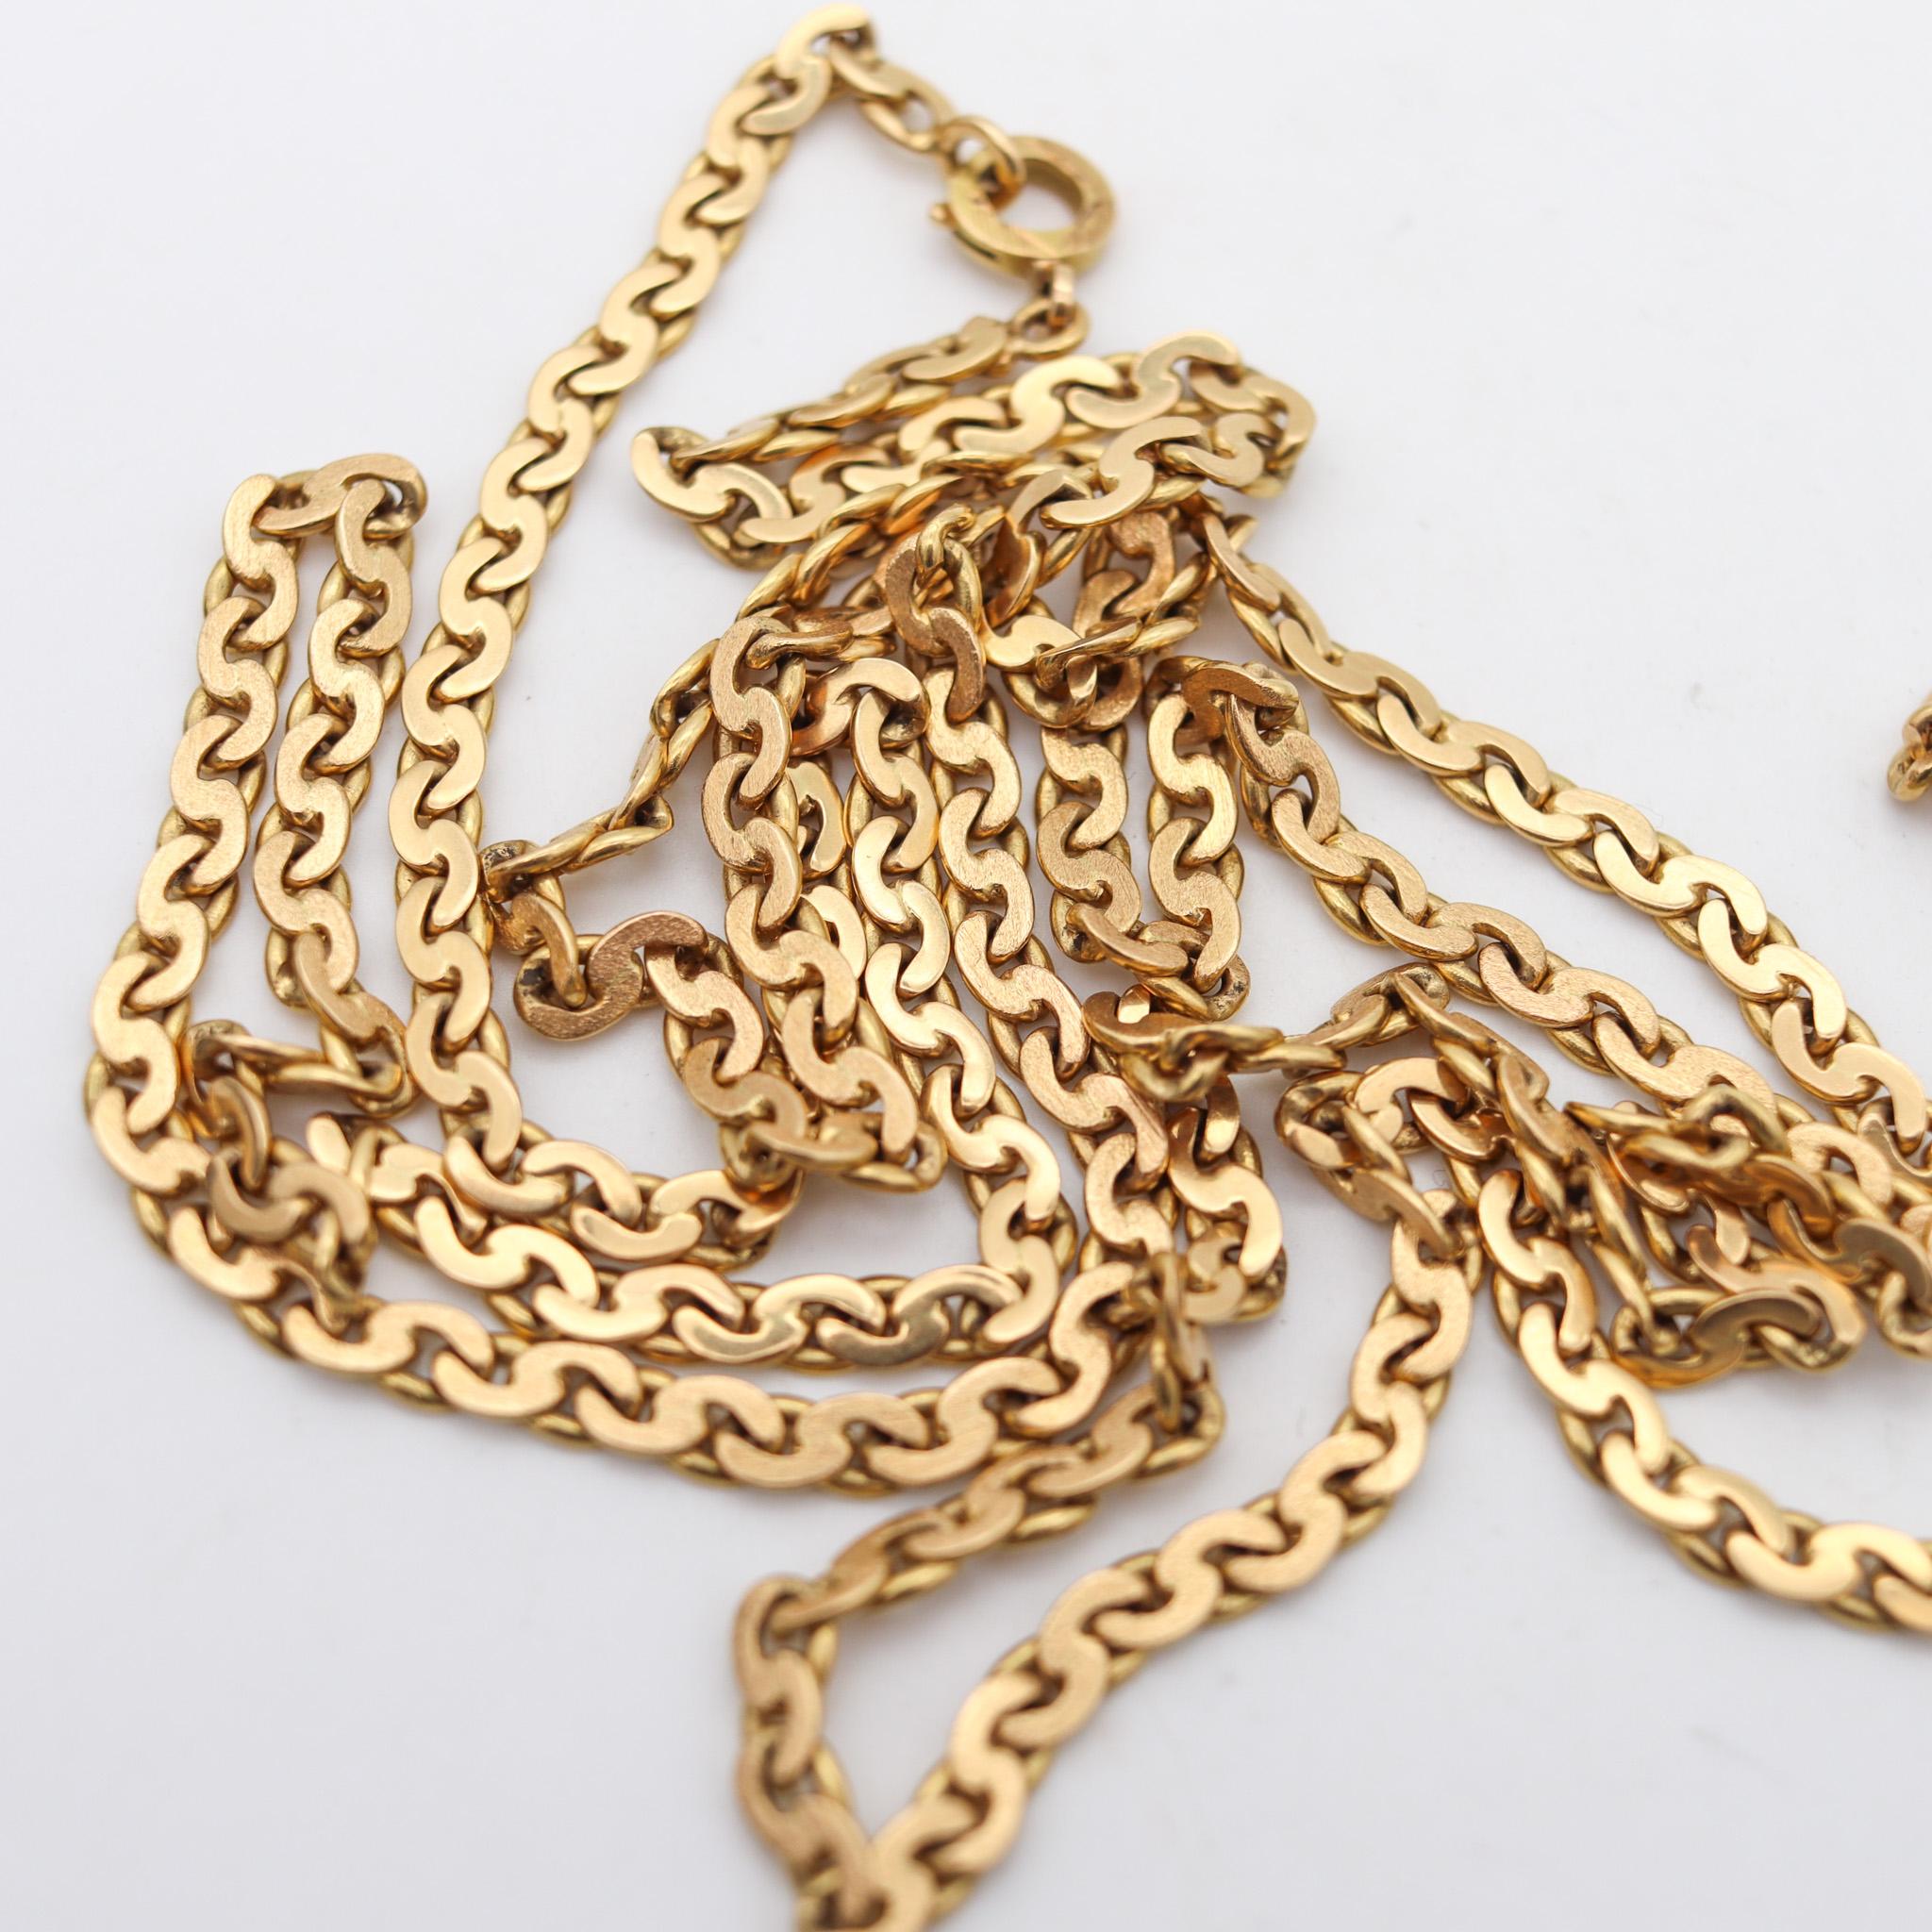 Women's or Men's Marchisio Napoleone 1935 Italian Art Deco Long Chain In Solid 18Kt Yellow Gold For Sale